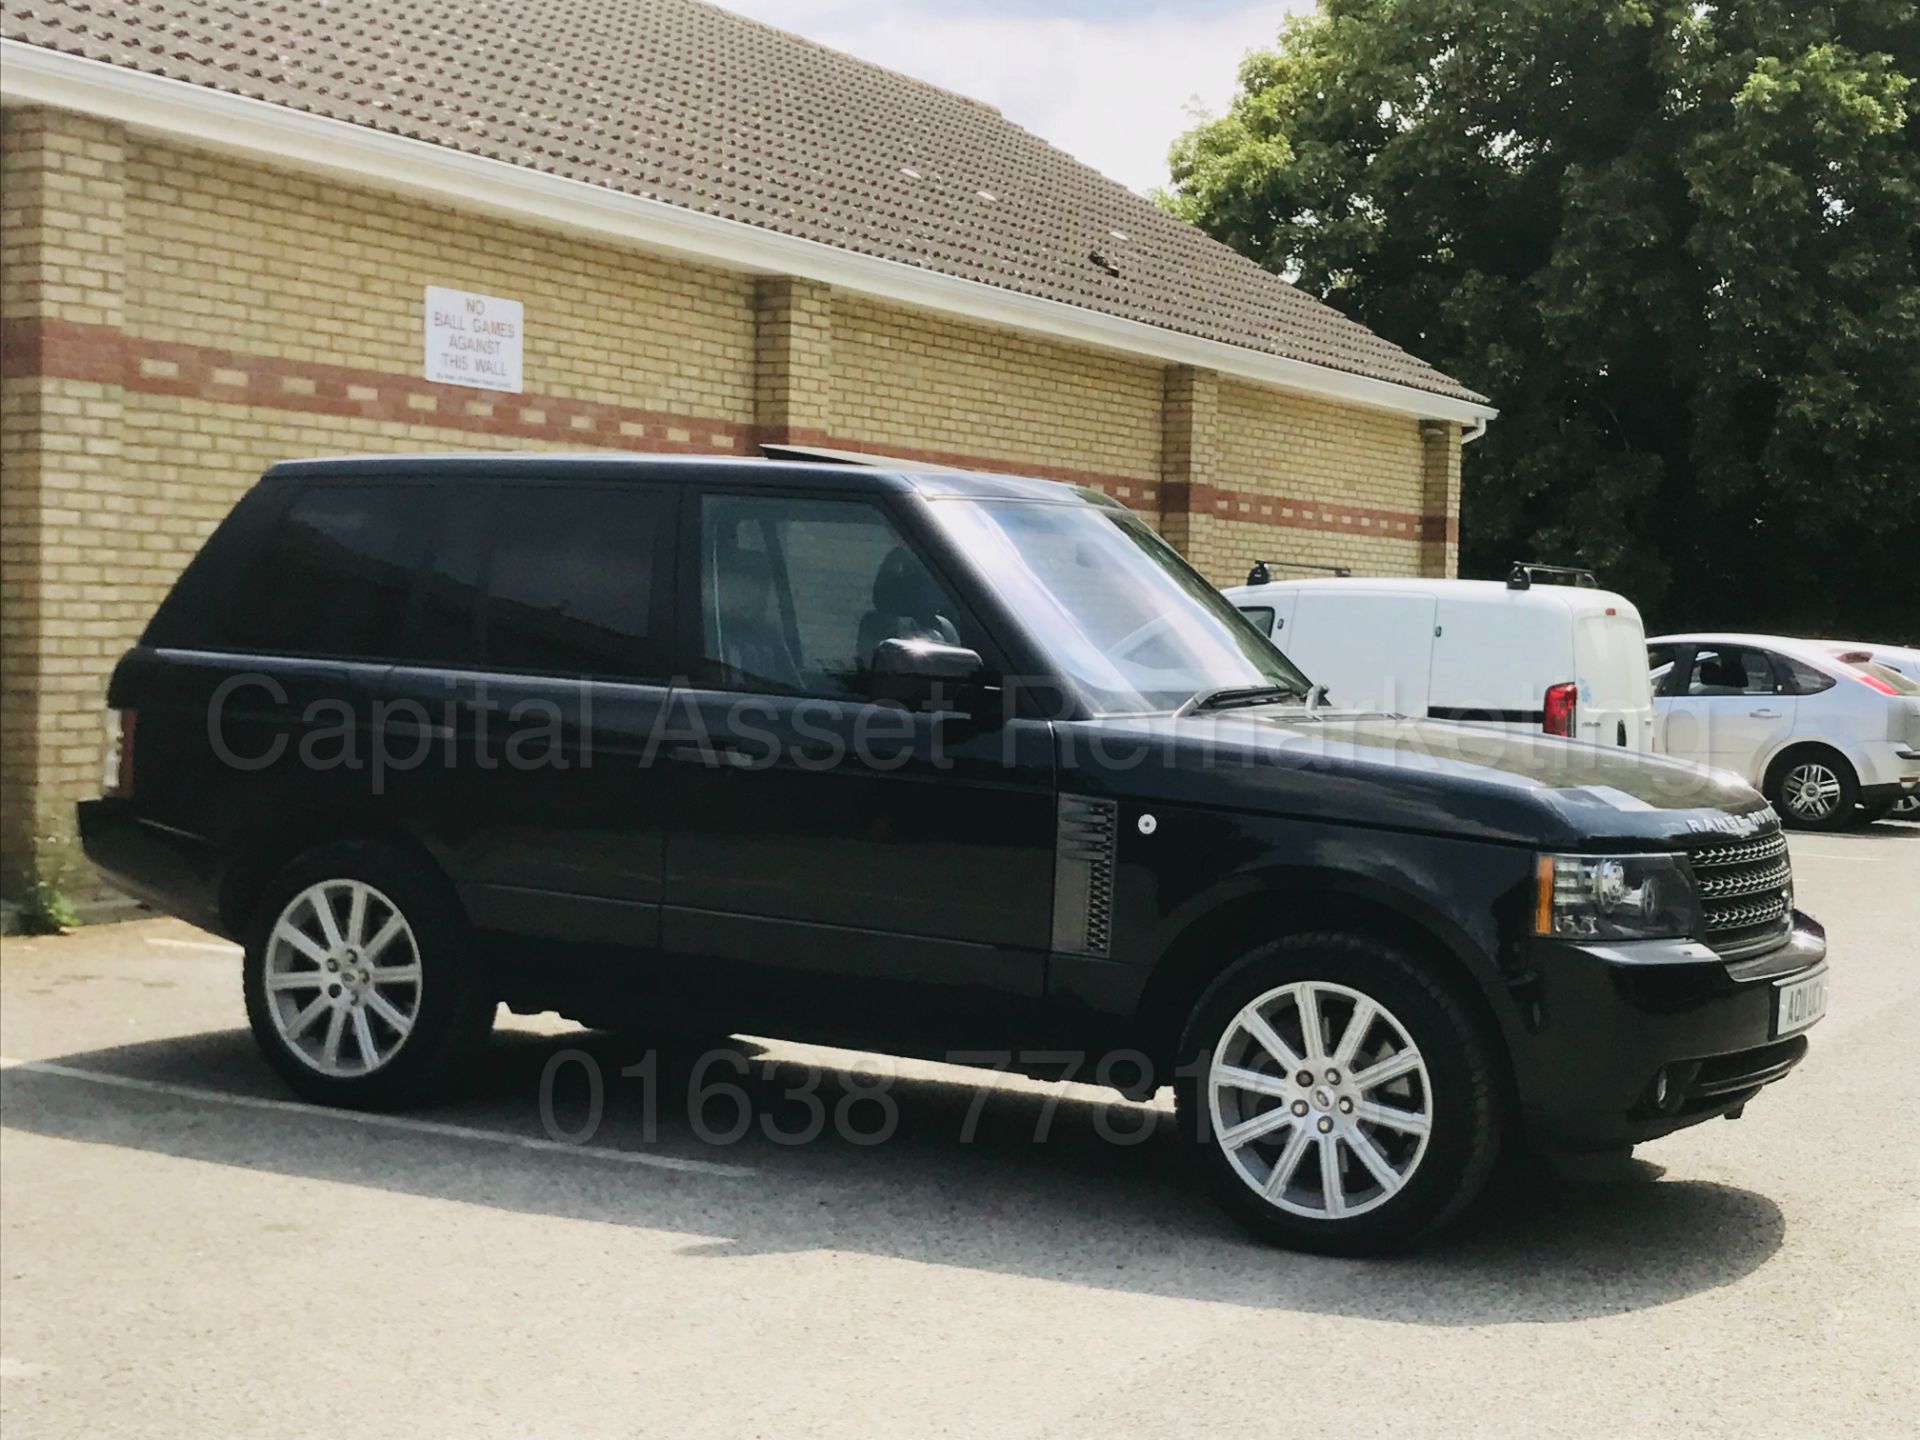 (On Sale) RANGE ROVER VOGUE SE (2011) 'TDV8 -8 SPEED AUTO' **FULLY LOADED** (1 OWNER - FULL HISTORY) - Image 11 of 60